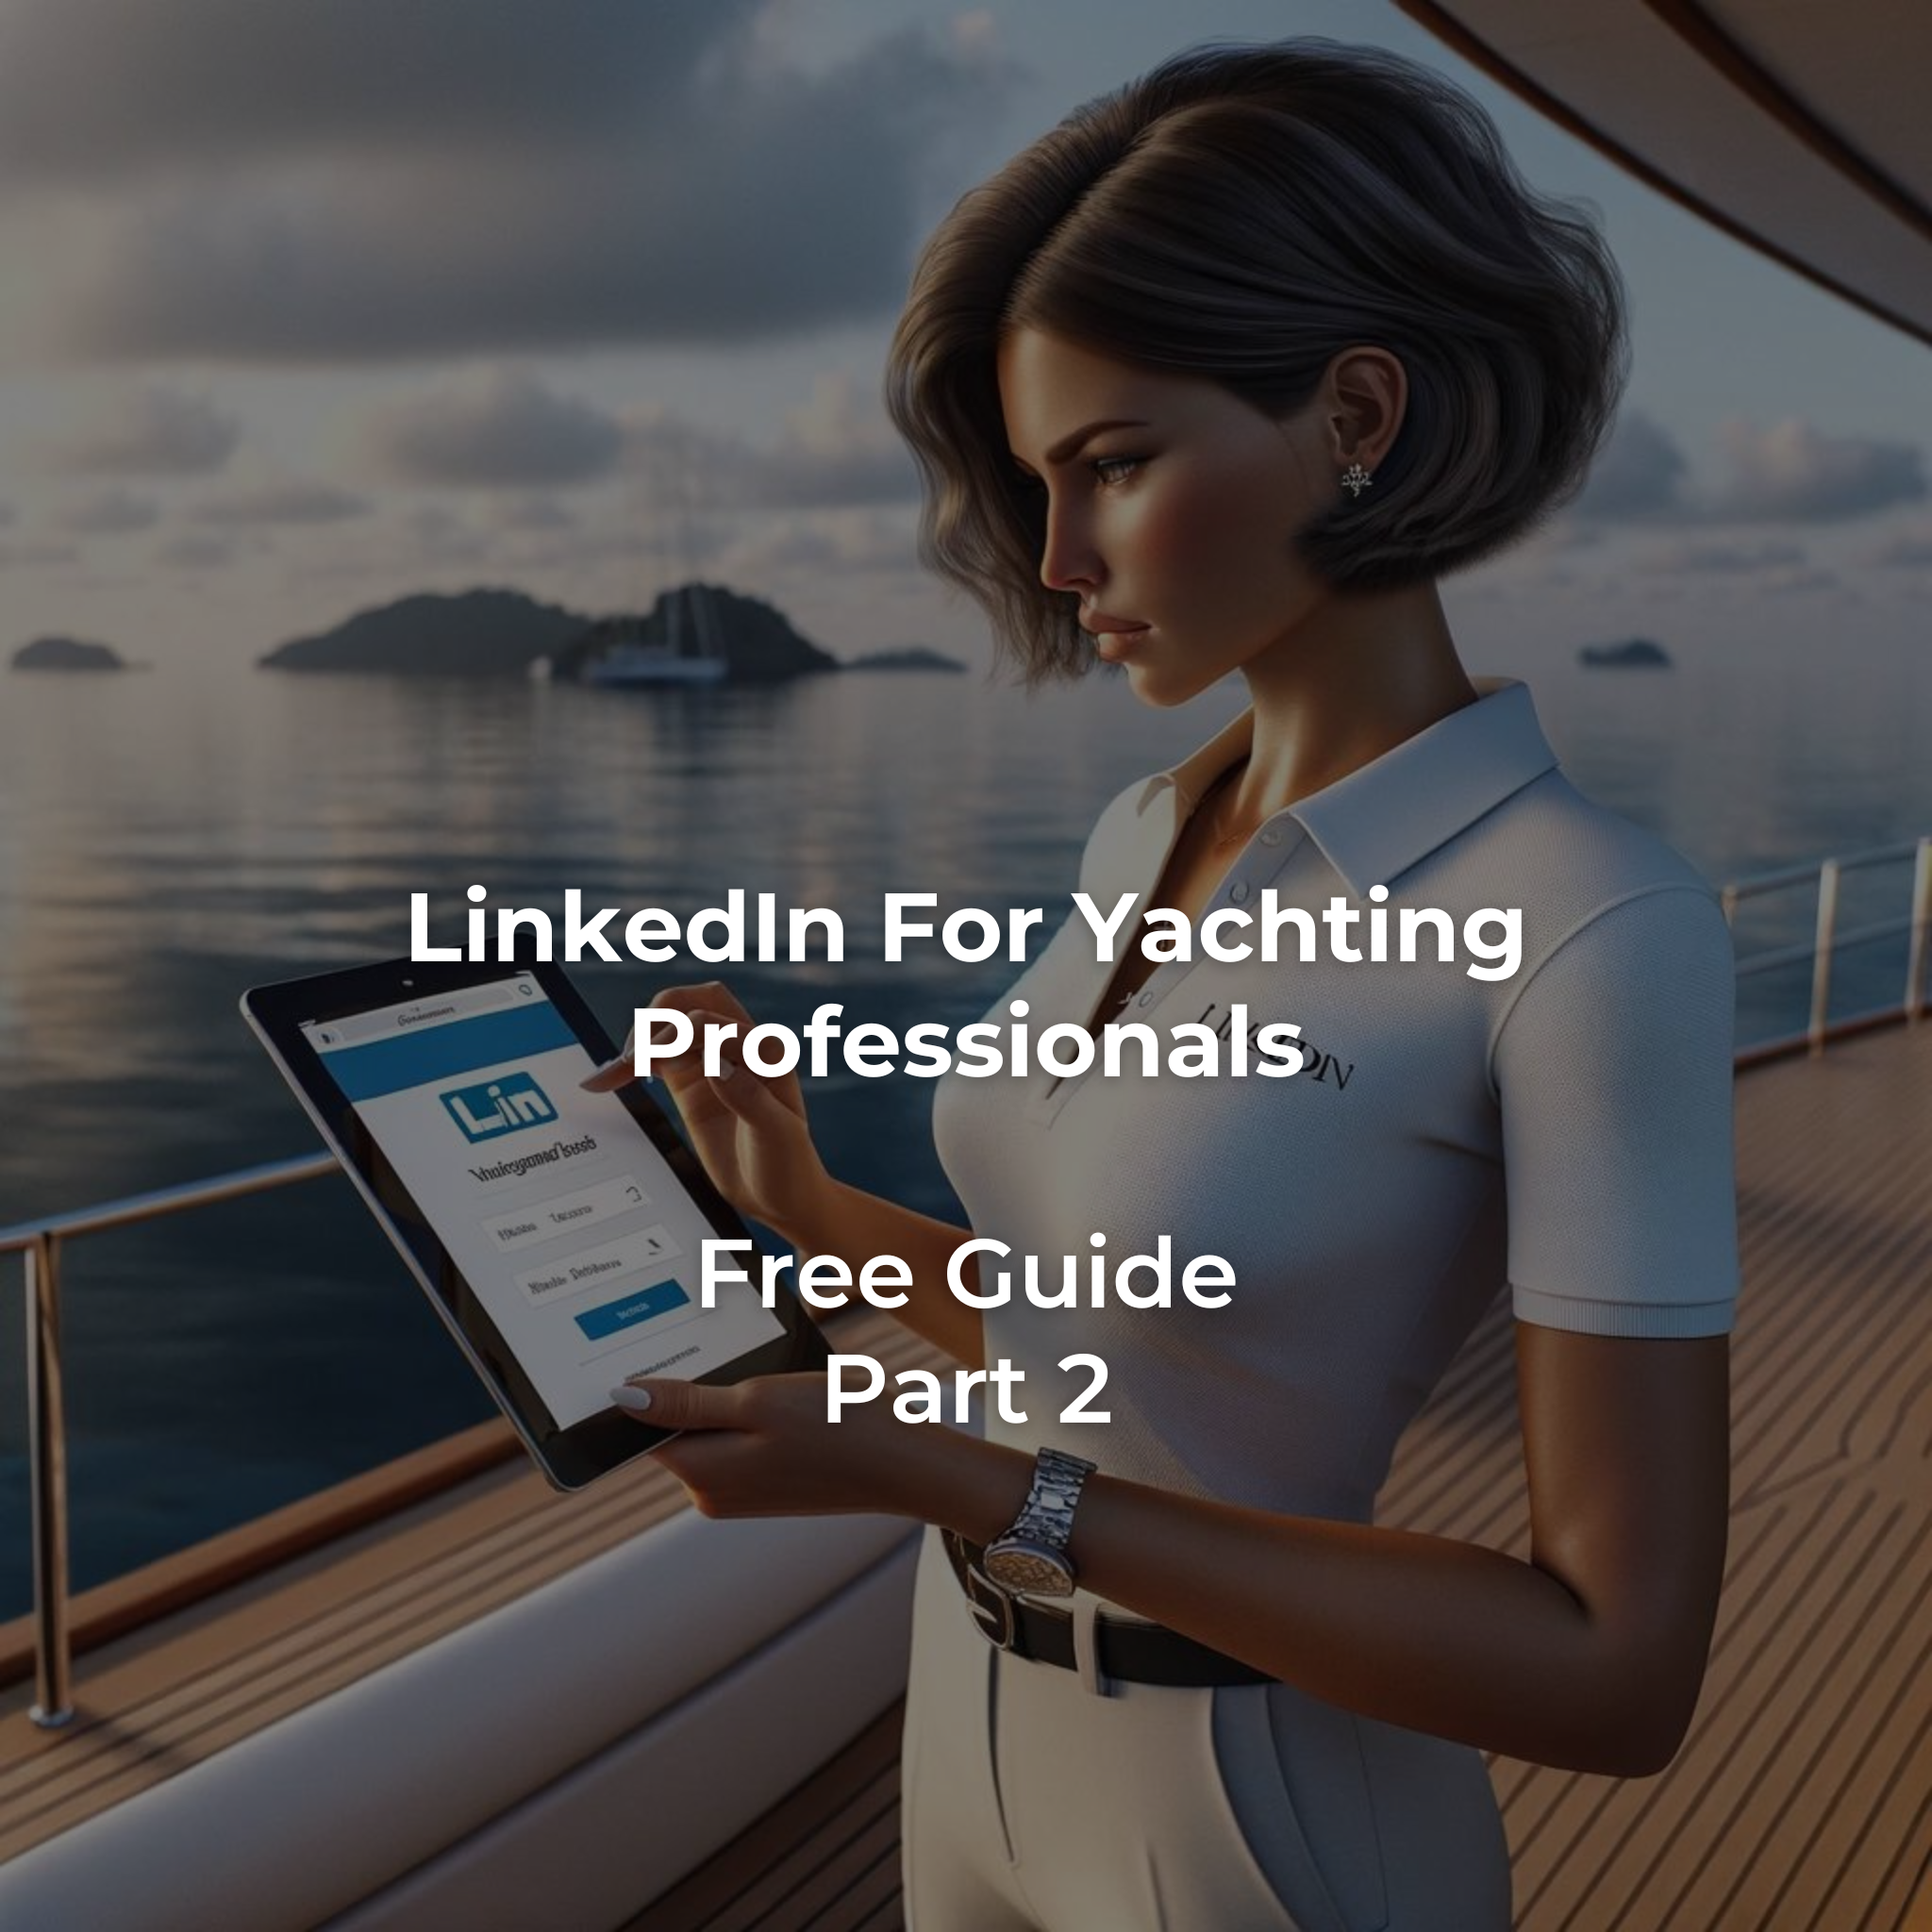 Linkedin For Yachting Professionals - Part 2